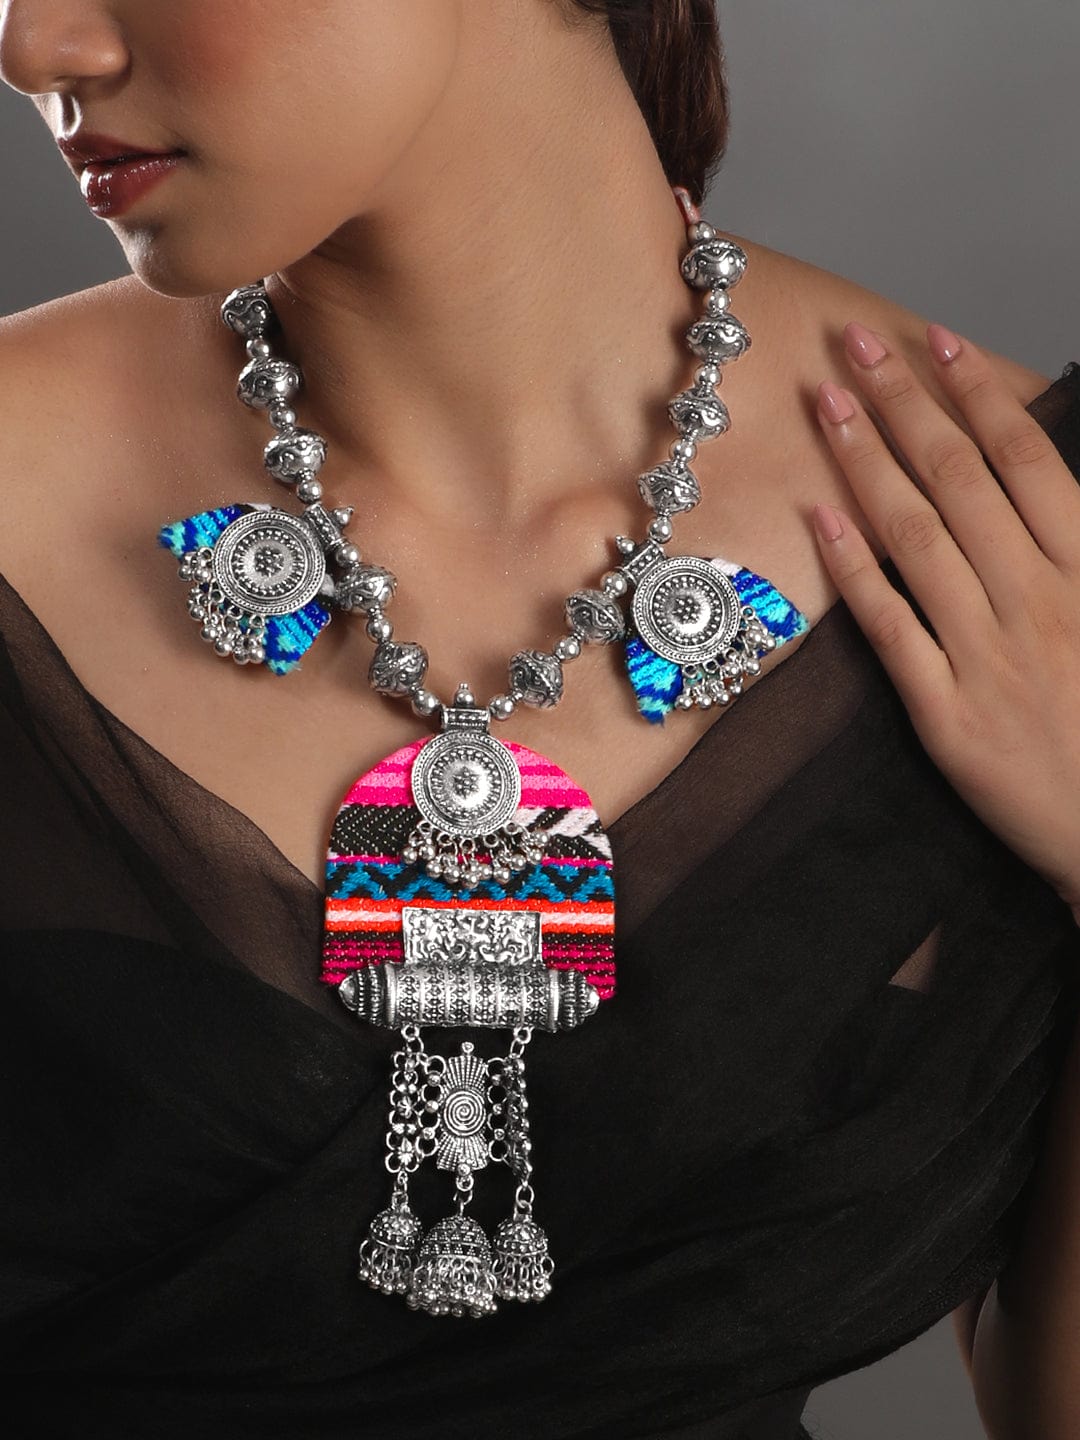 Rubans Oxidized Silver Plated Beaded & Threaded Statement Long Necklace Necklaces, Necklace Sets, Chains & Mangalsutra